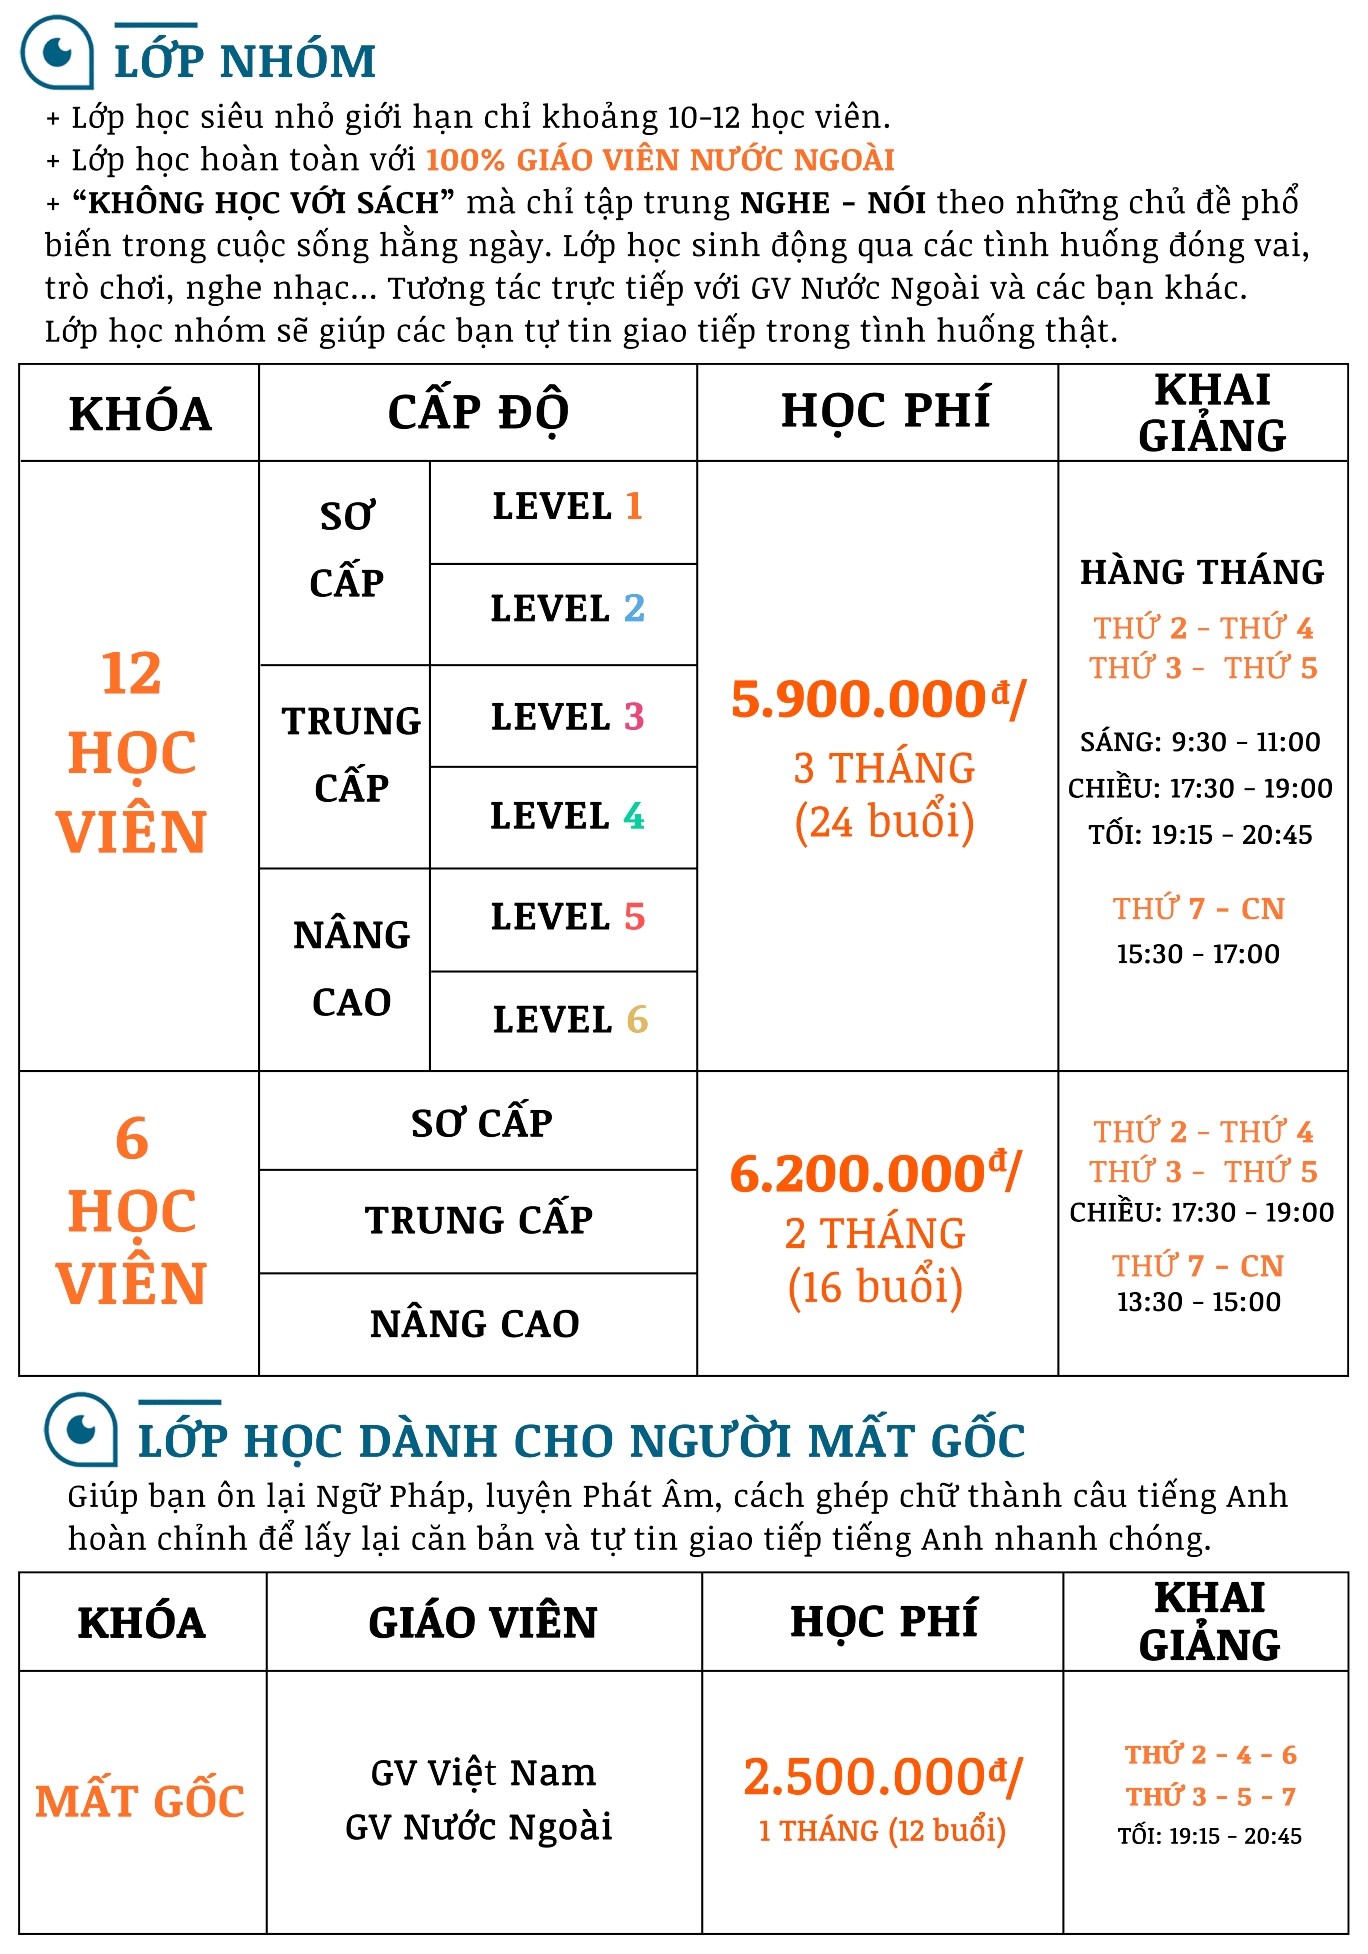 hoc phi lop nhom tieng anh nghe noi